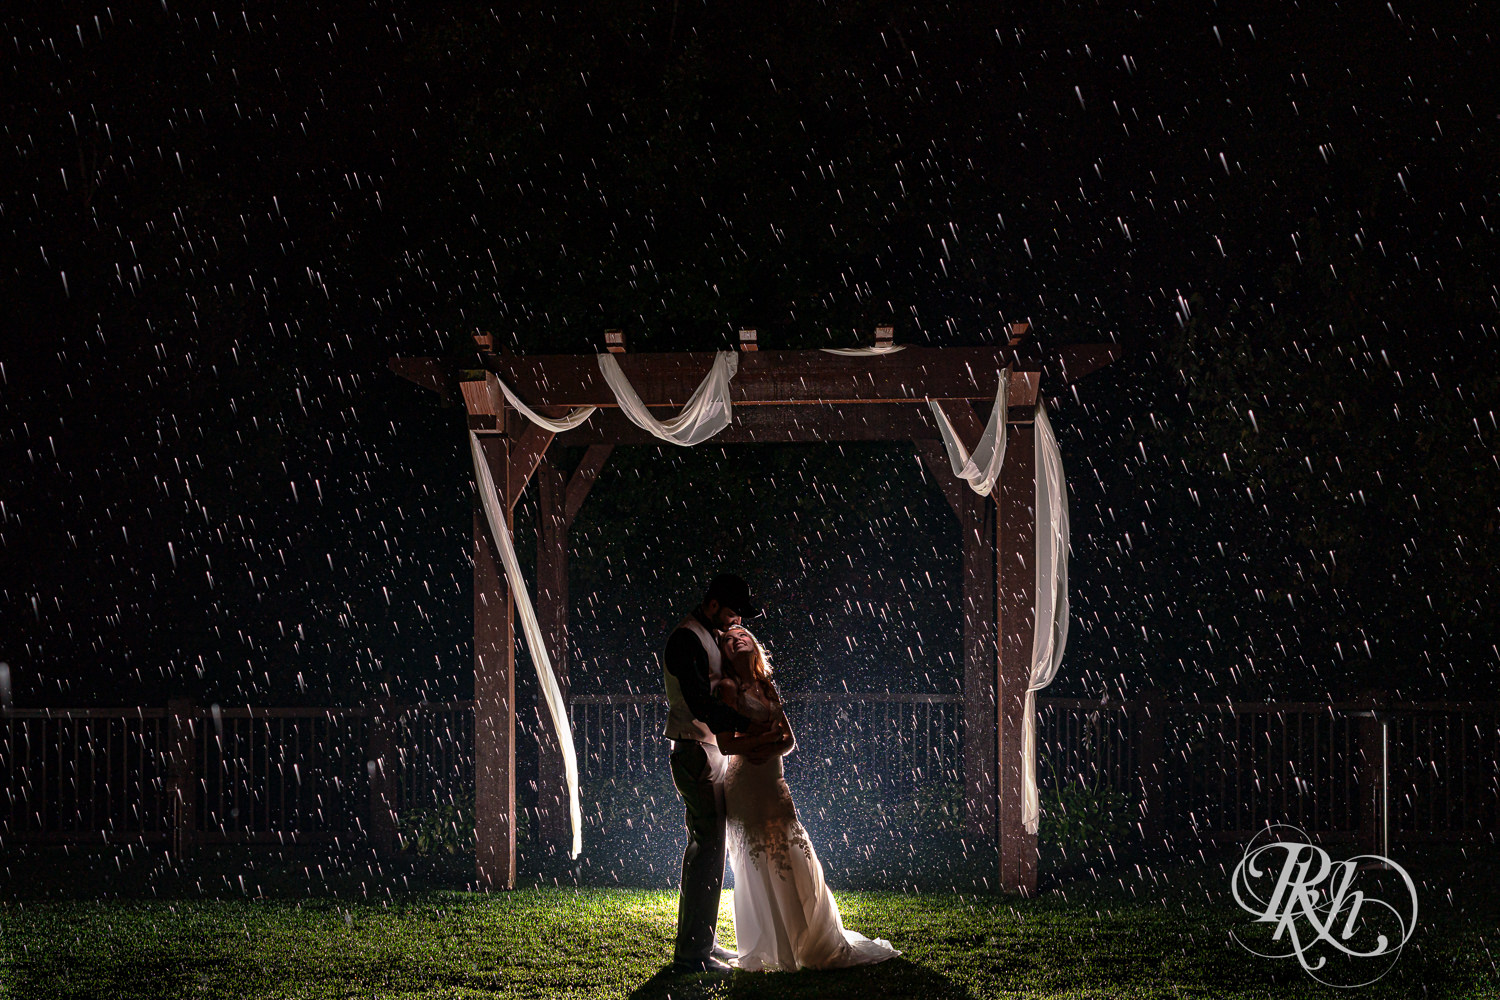 Bride and groom snuggle in the rain on wedding day at Bunker Hills Event Center in Coon Rapids, Minnesota.